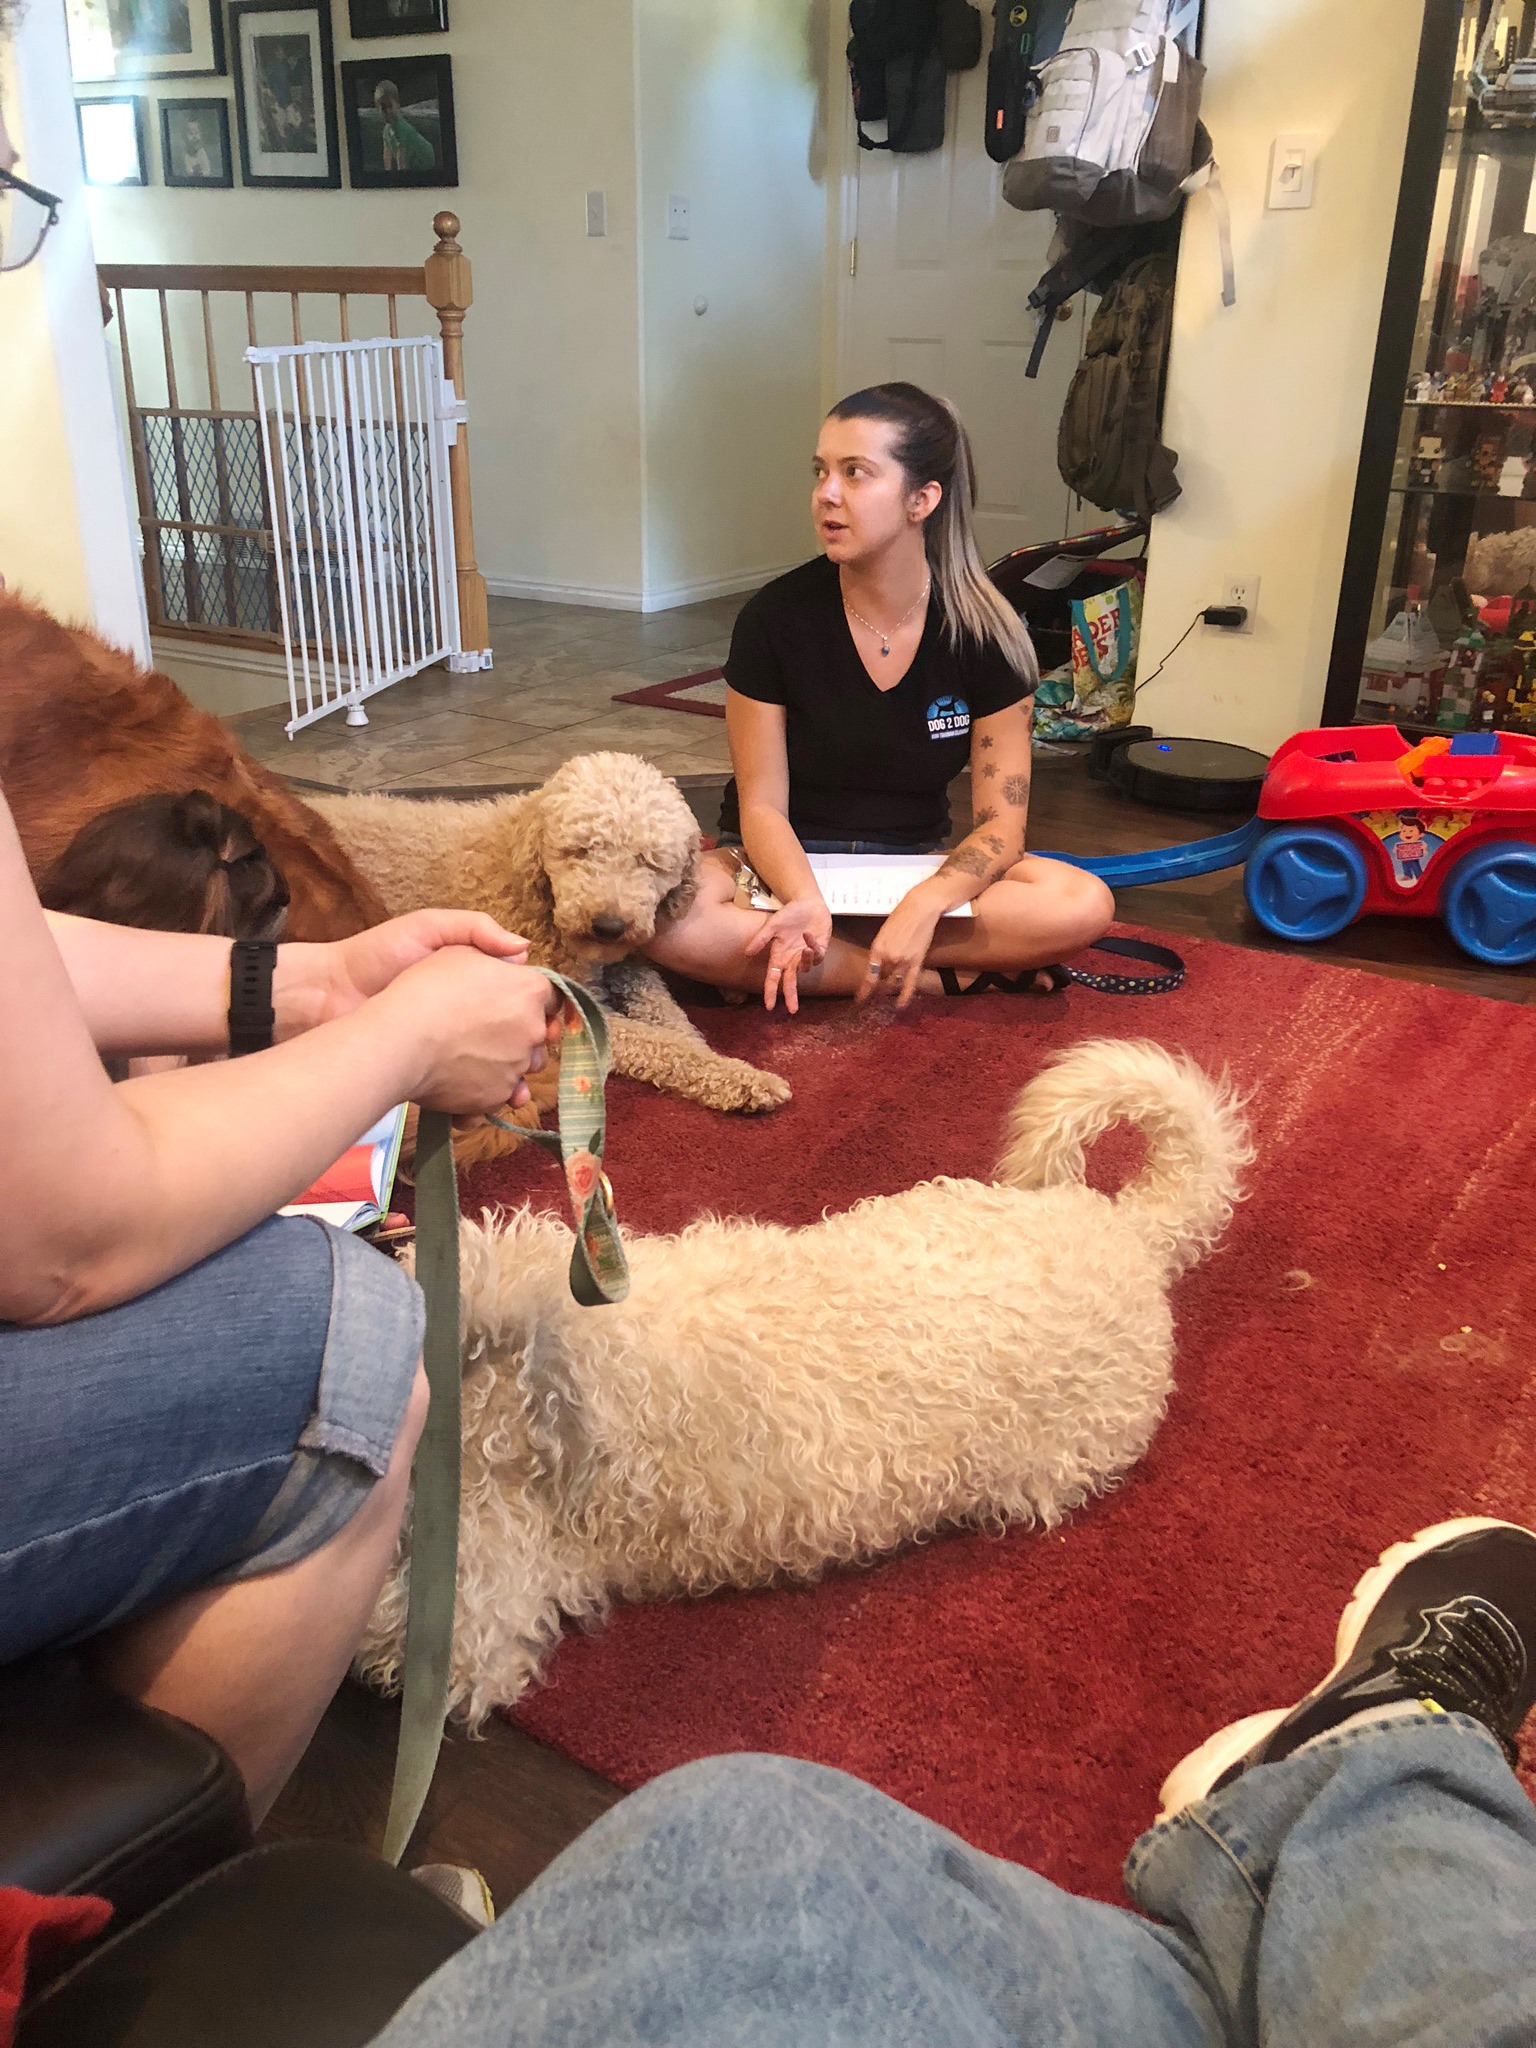 Samantha is a dog trainer with students indoor